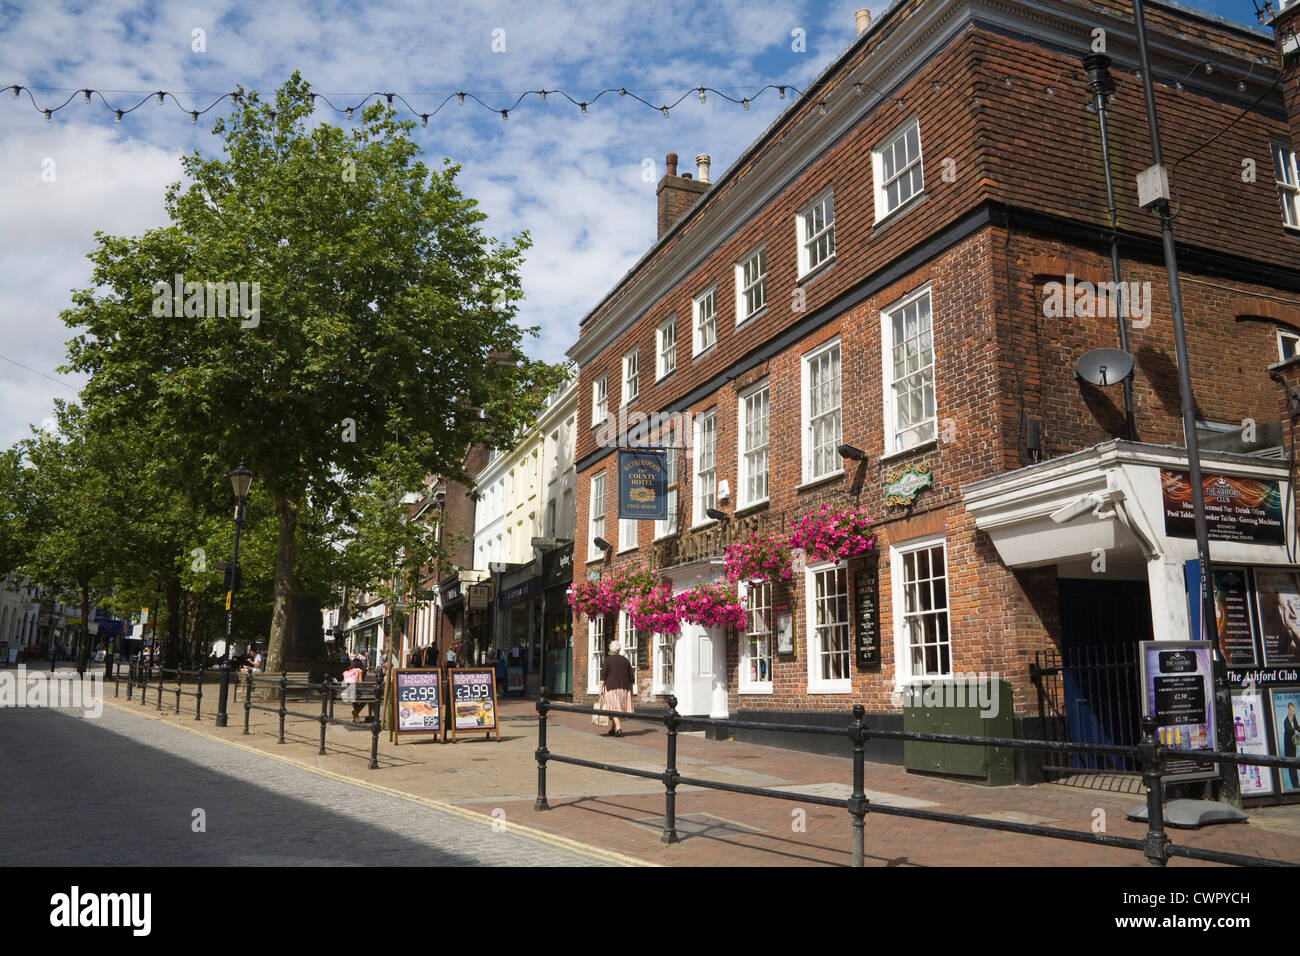 Ashford Kent England County Hotel a Wetherspoon restaurant pub end of High Street in the town centre Stock Photo